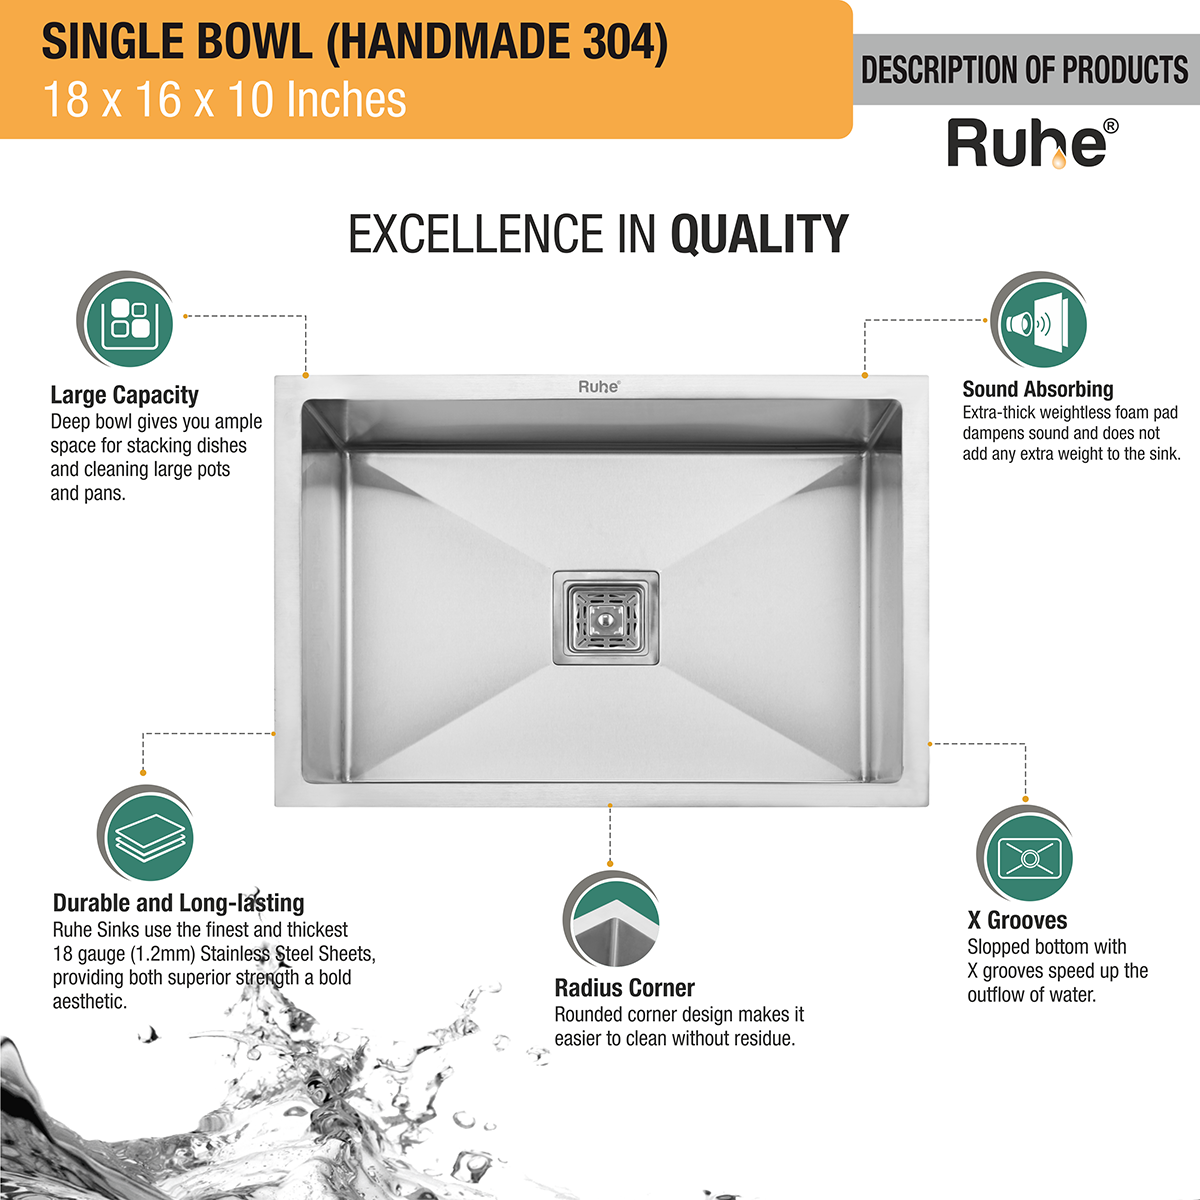 Handmade Single Bowl 304-Grade Kitchen Sink (18 x 16 x 10 Inches) description and quality of sink